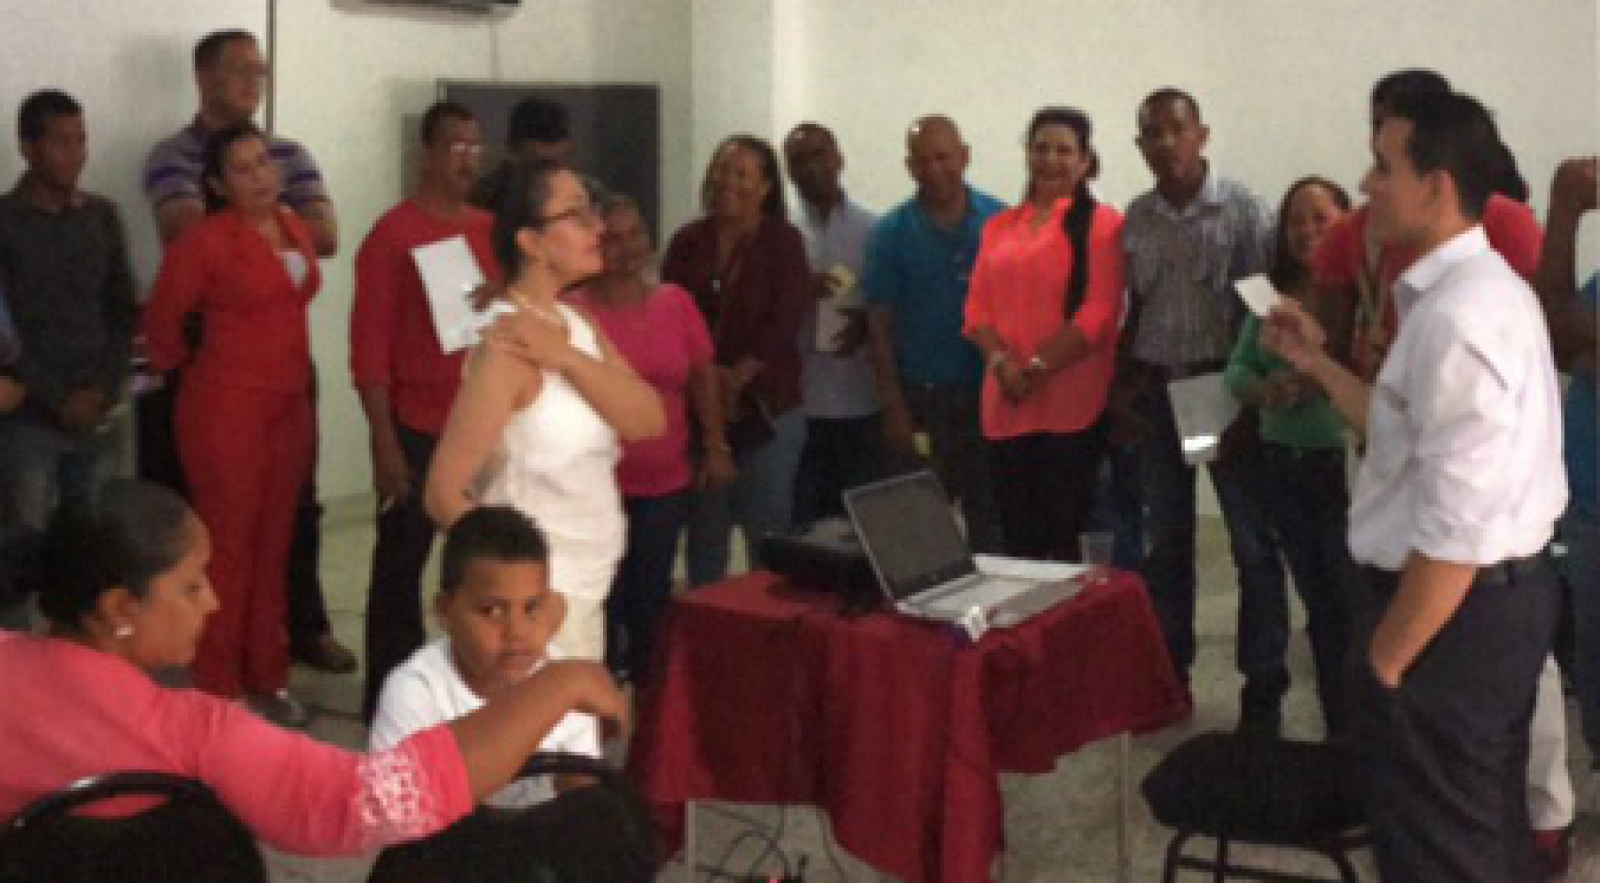 Ahead of October Municipal Elections, Candidates Develop Policy Plans for Peace in Colombia